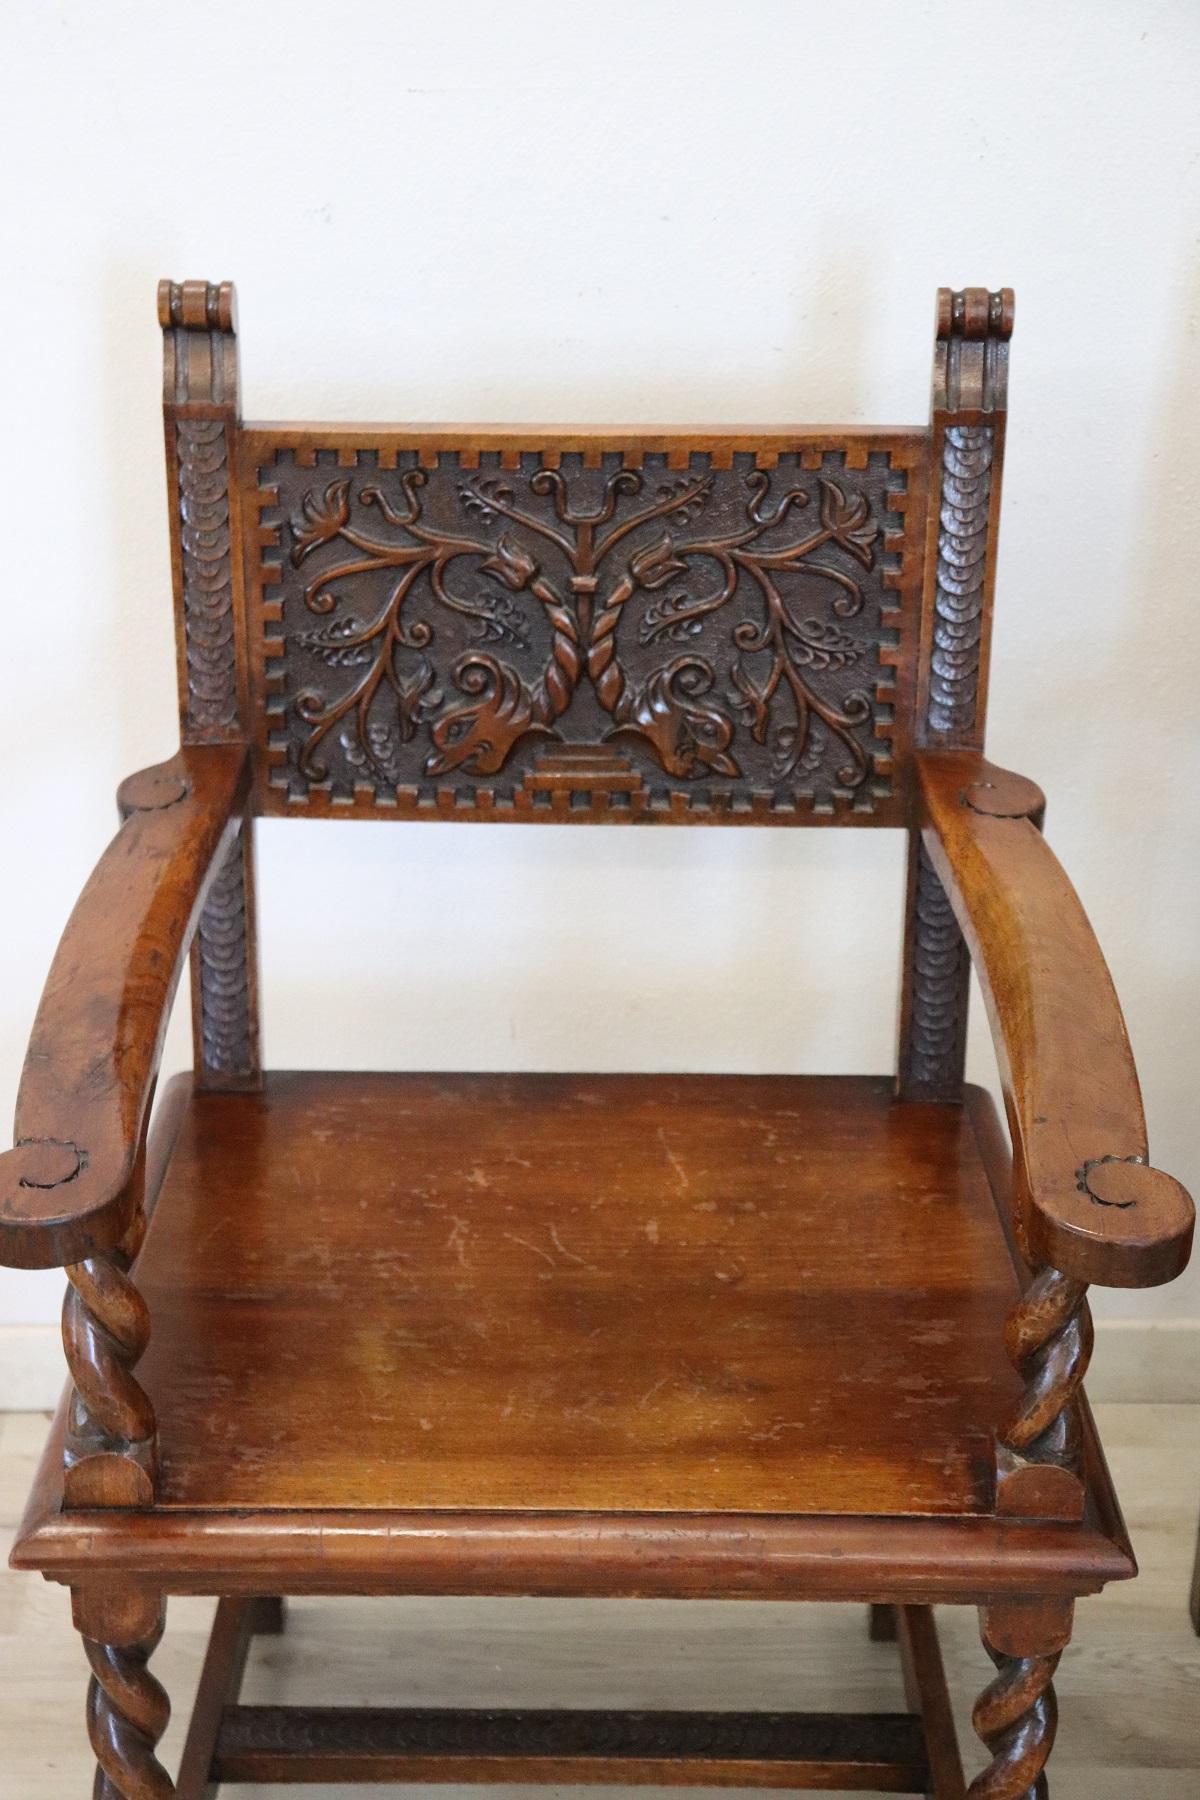 Impressive rare pair of throne chairs in perfect Italian Renaissance style. Made of solid walnut wood. The finely carved wooden backrest with very complex decoration. The armrests and legs are in turned solid walnut. Perfect for use as a head of the